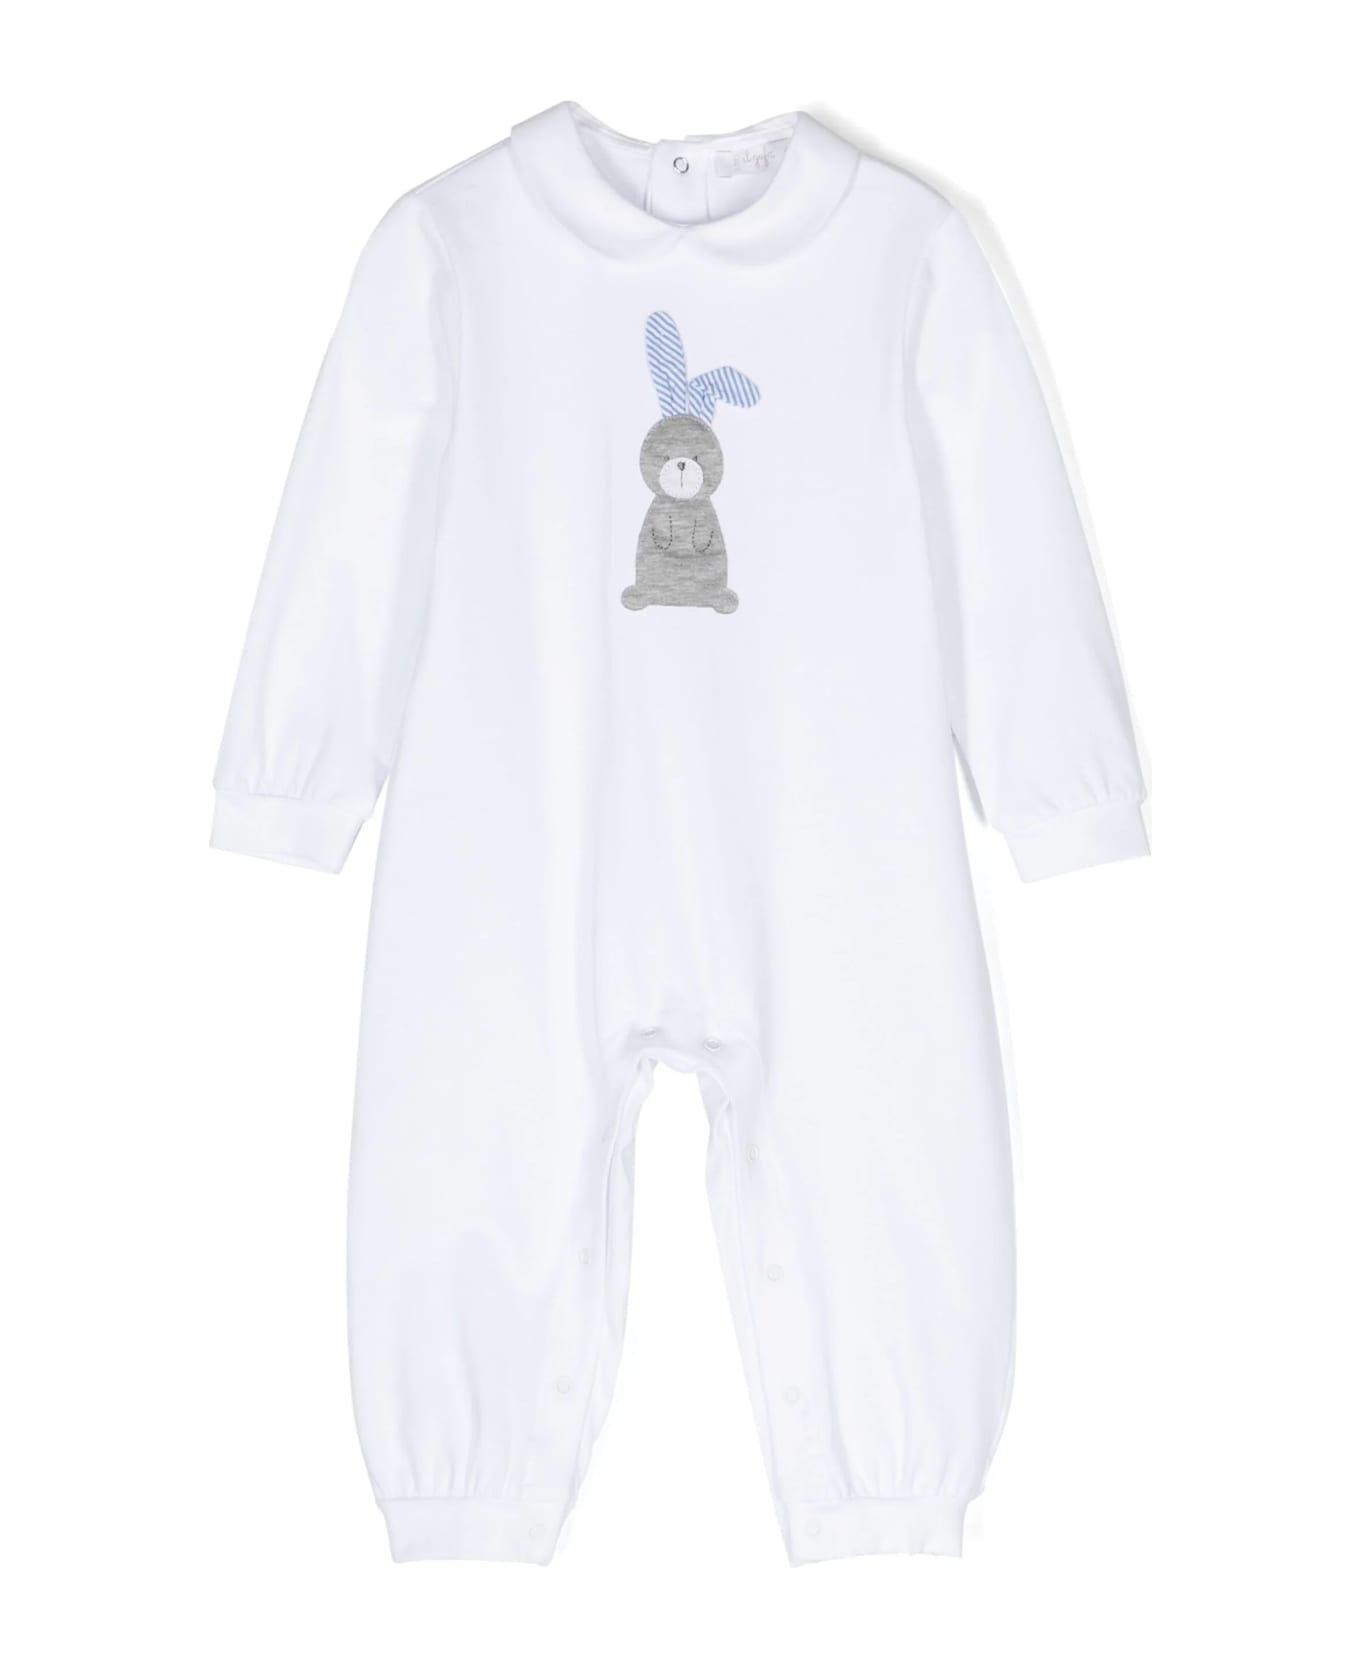 Il Gufo White Stretch Jersey Playsuit With Rabbit Motif - White